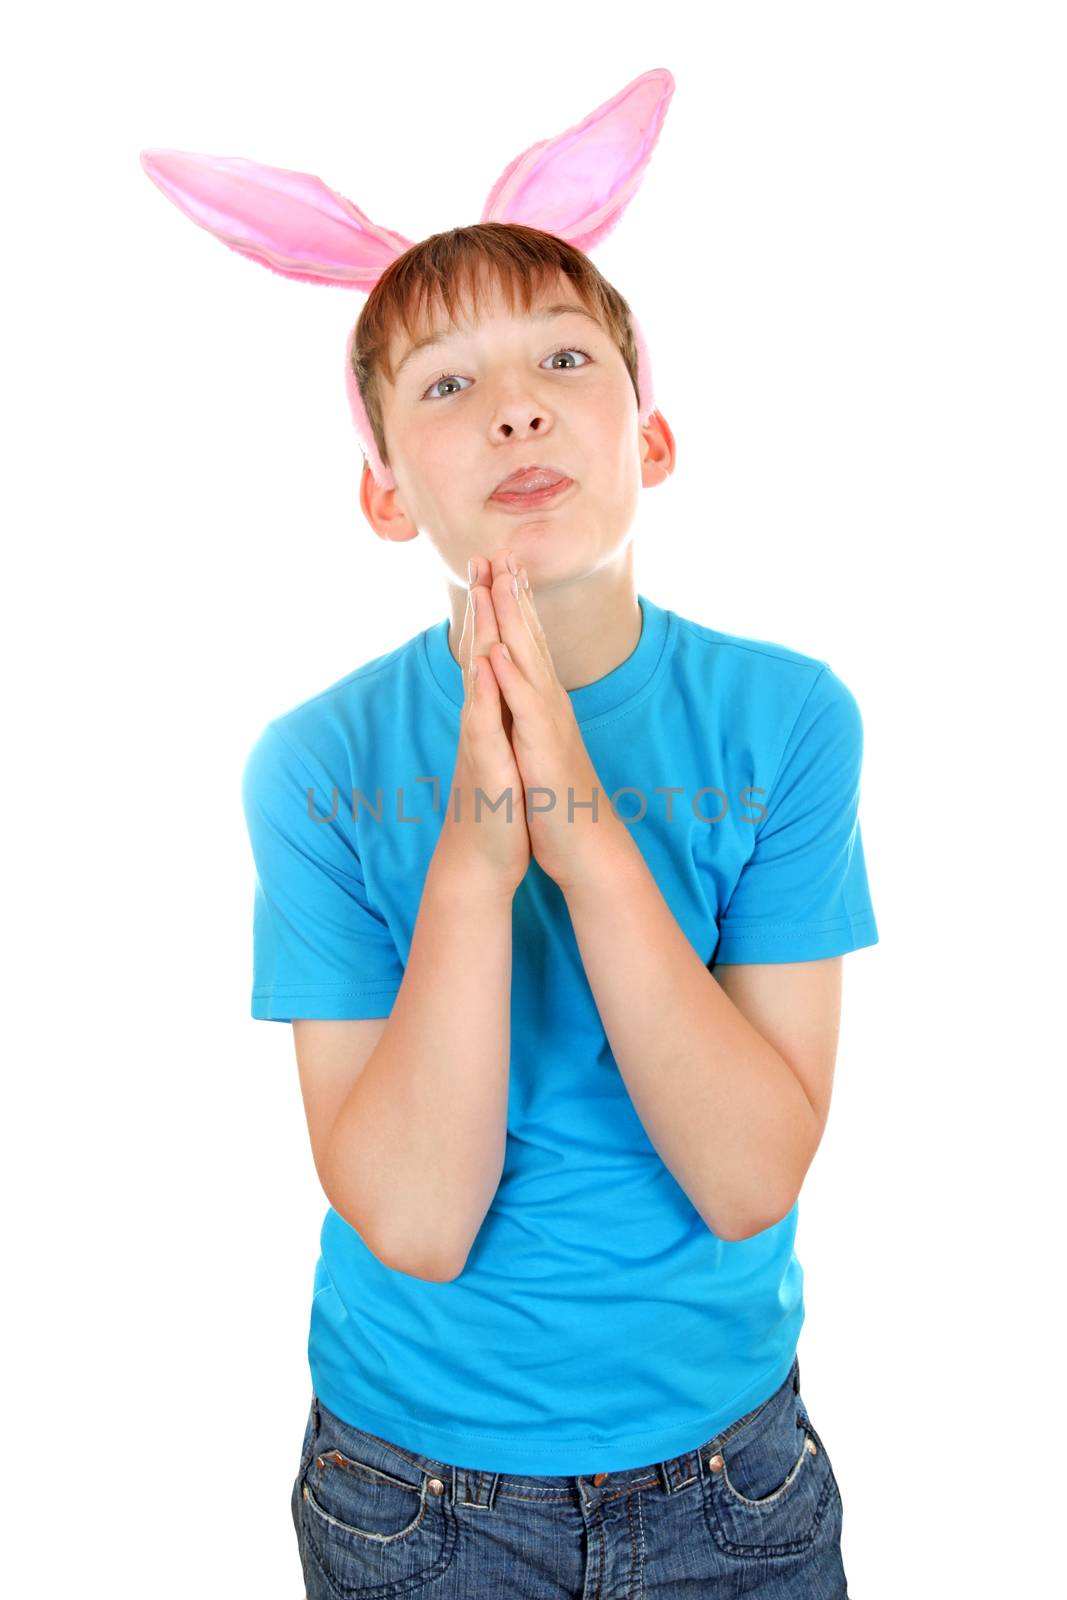 Kid with Bunny Ears by sabphoto